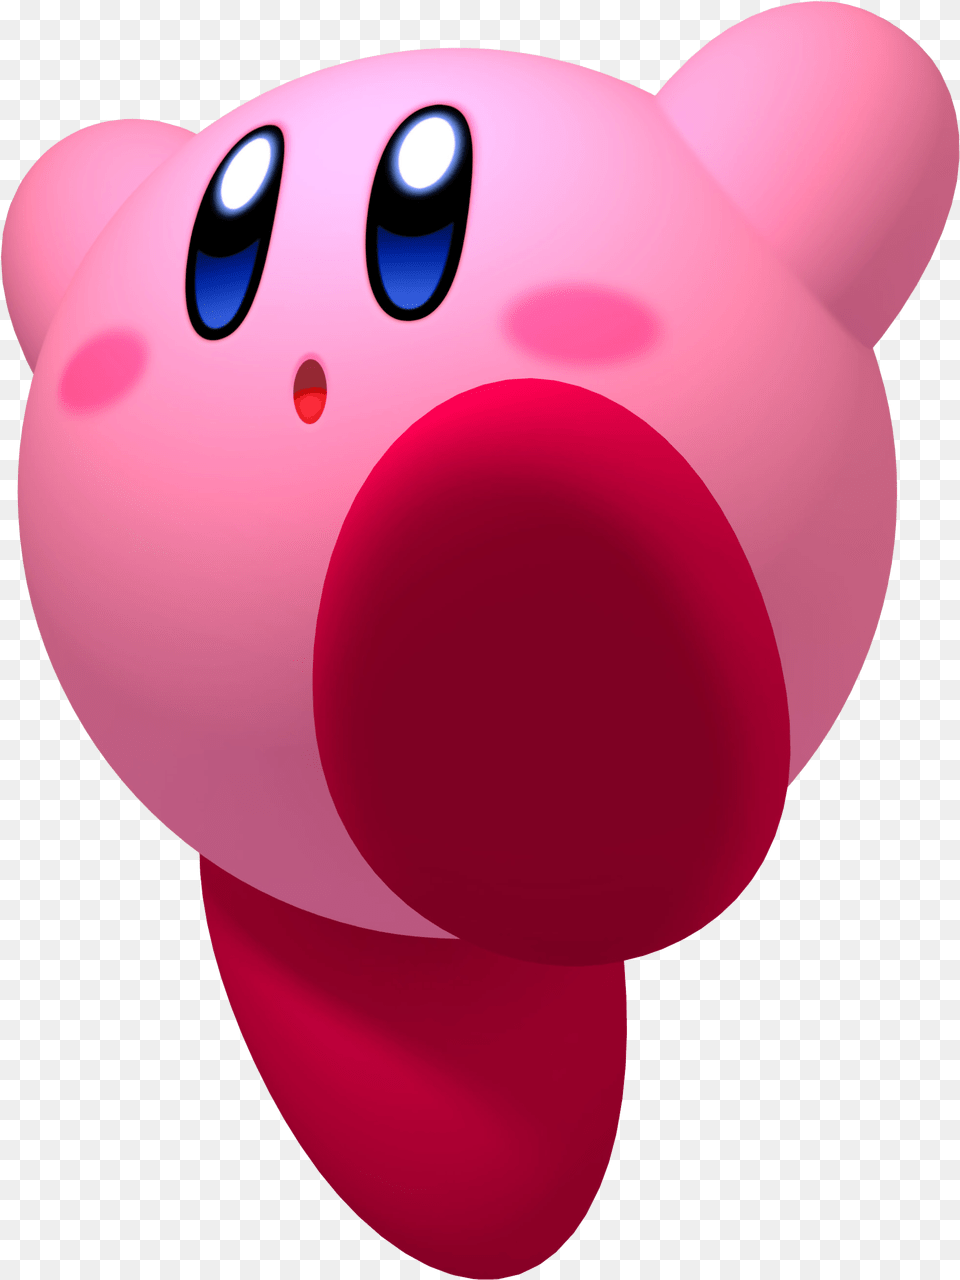 Kirby S Return To Dream Land Kirby S Dream Land Kirby Kirby, Piggy Bank Free Transparent Png